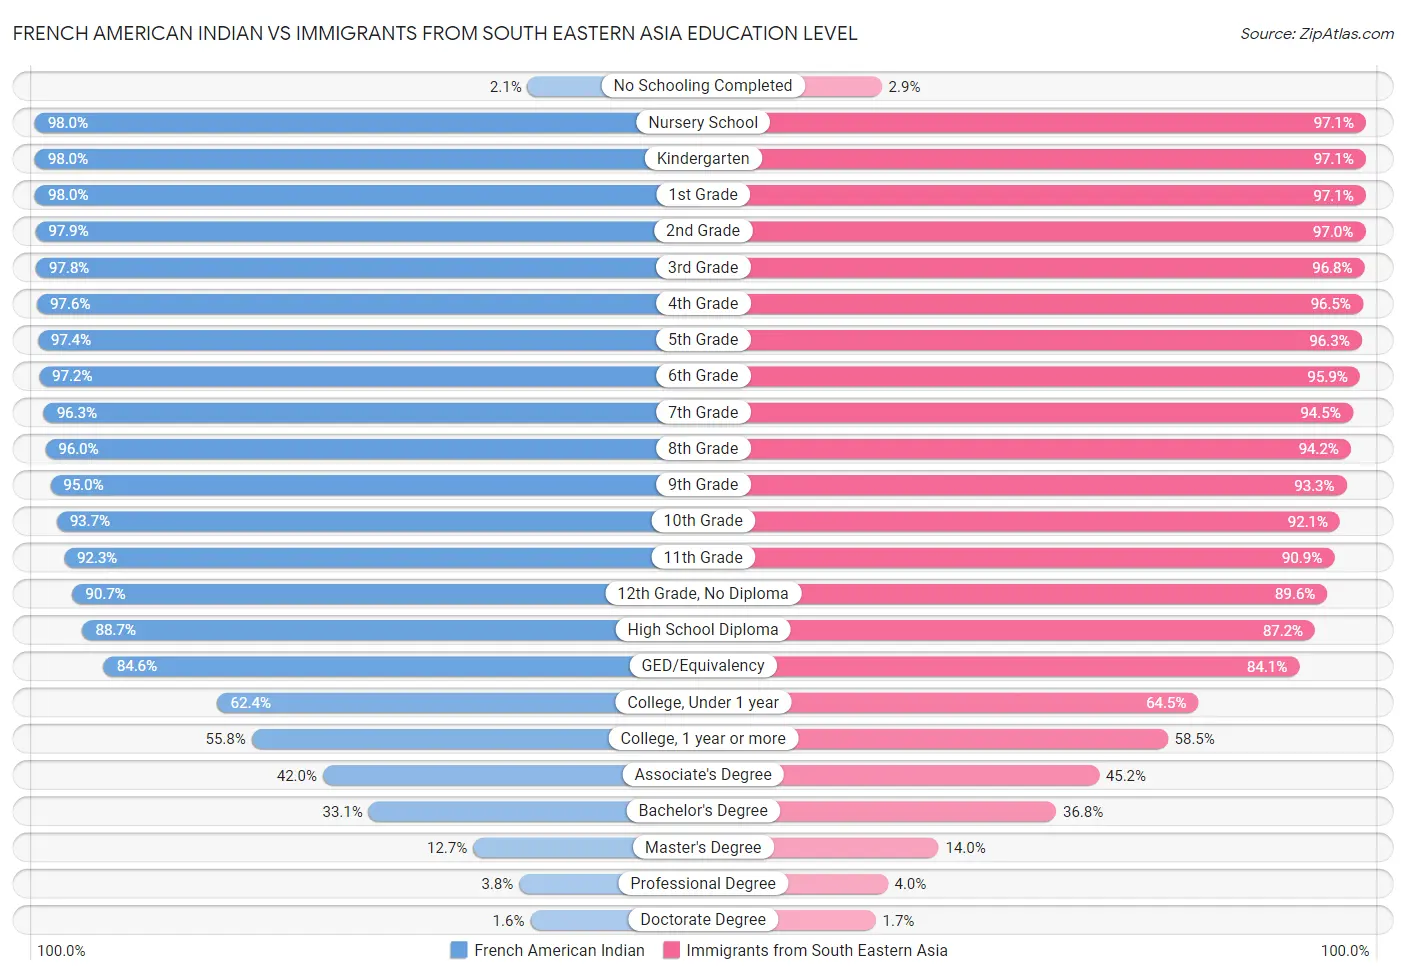 French American Indian vs Immigrants from South Eastern Asia Education Level